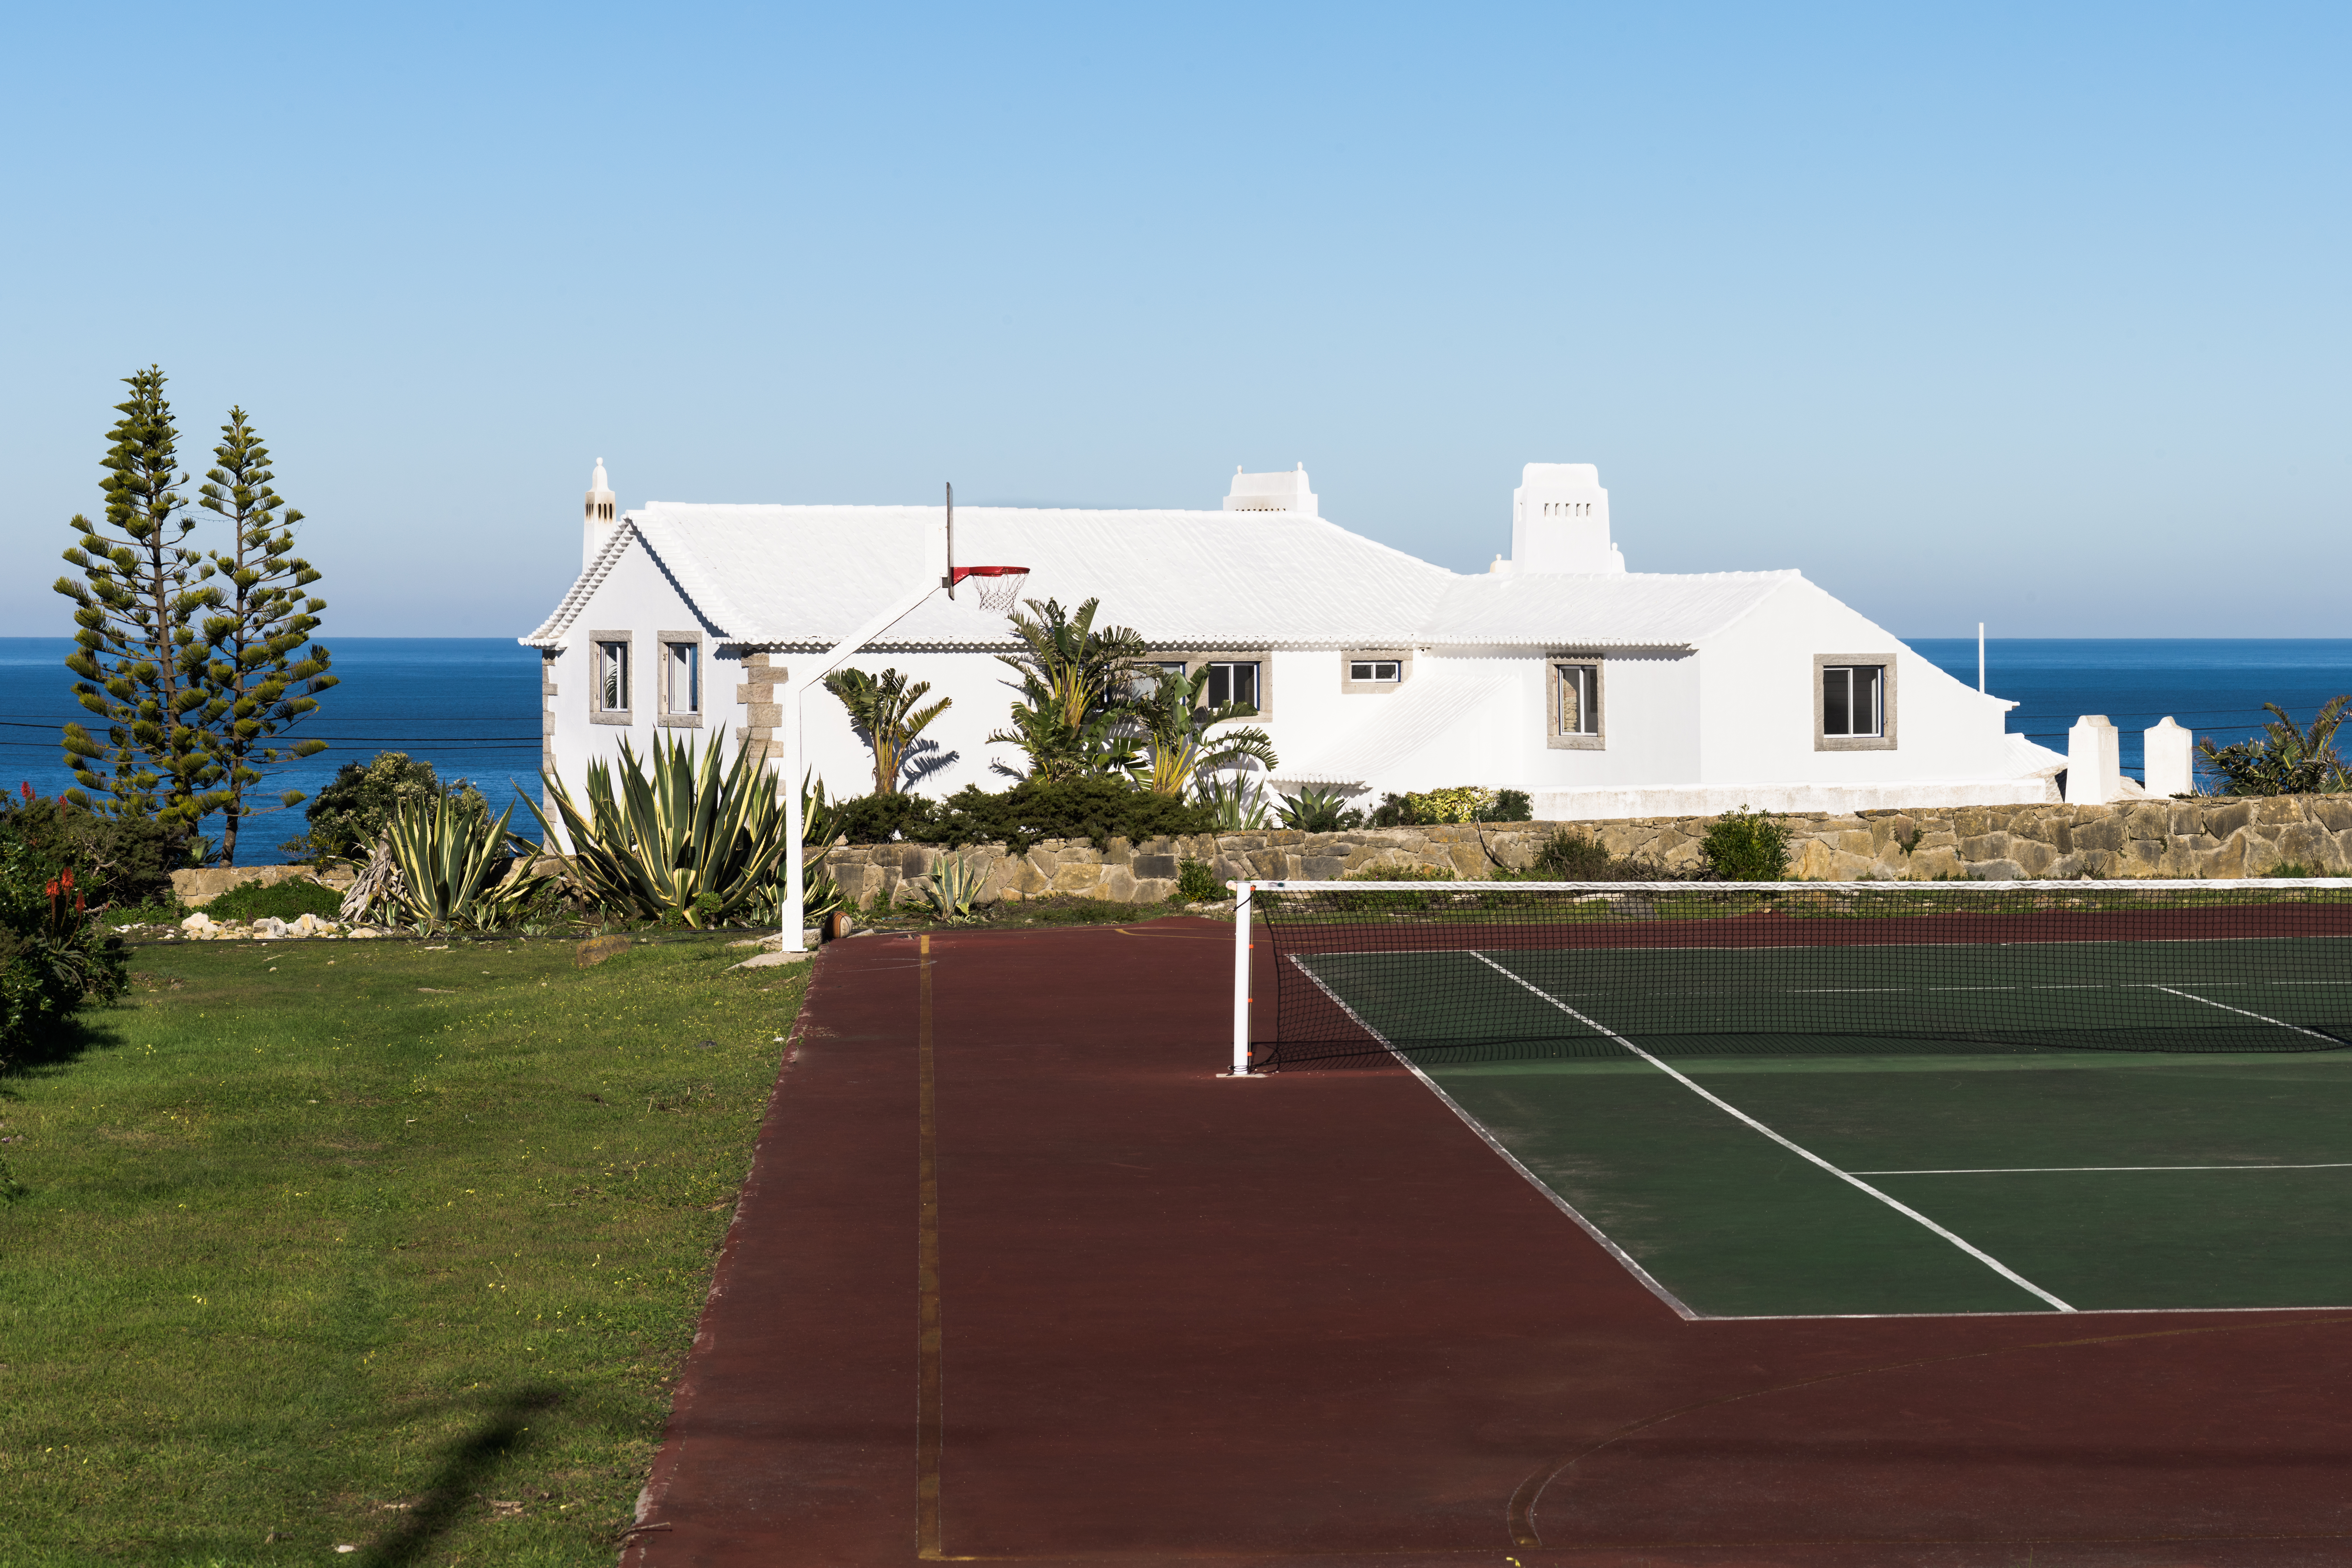 Tennis court on the property